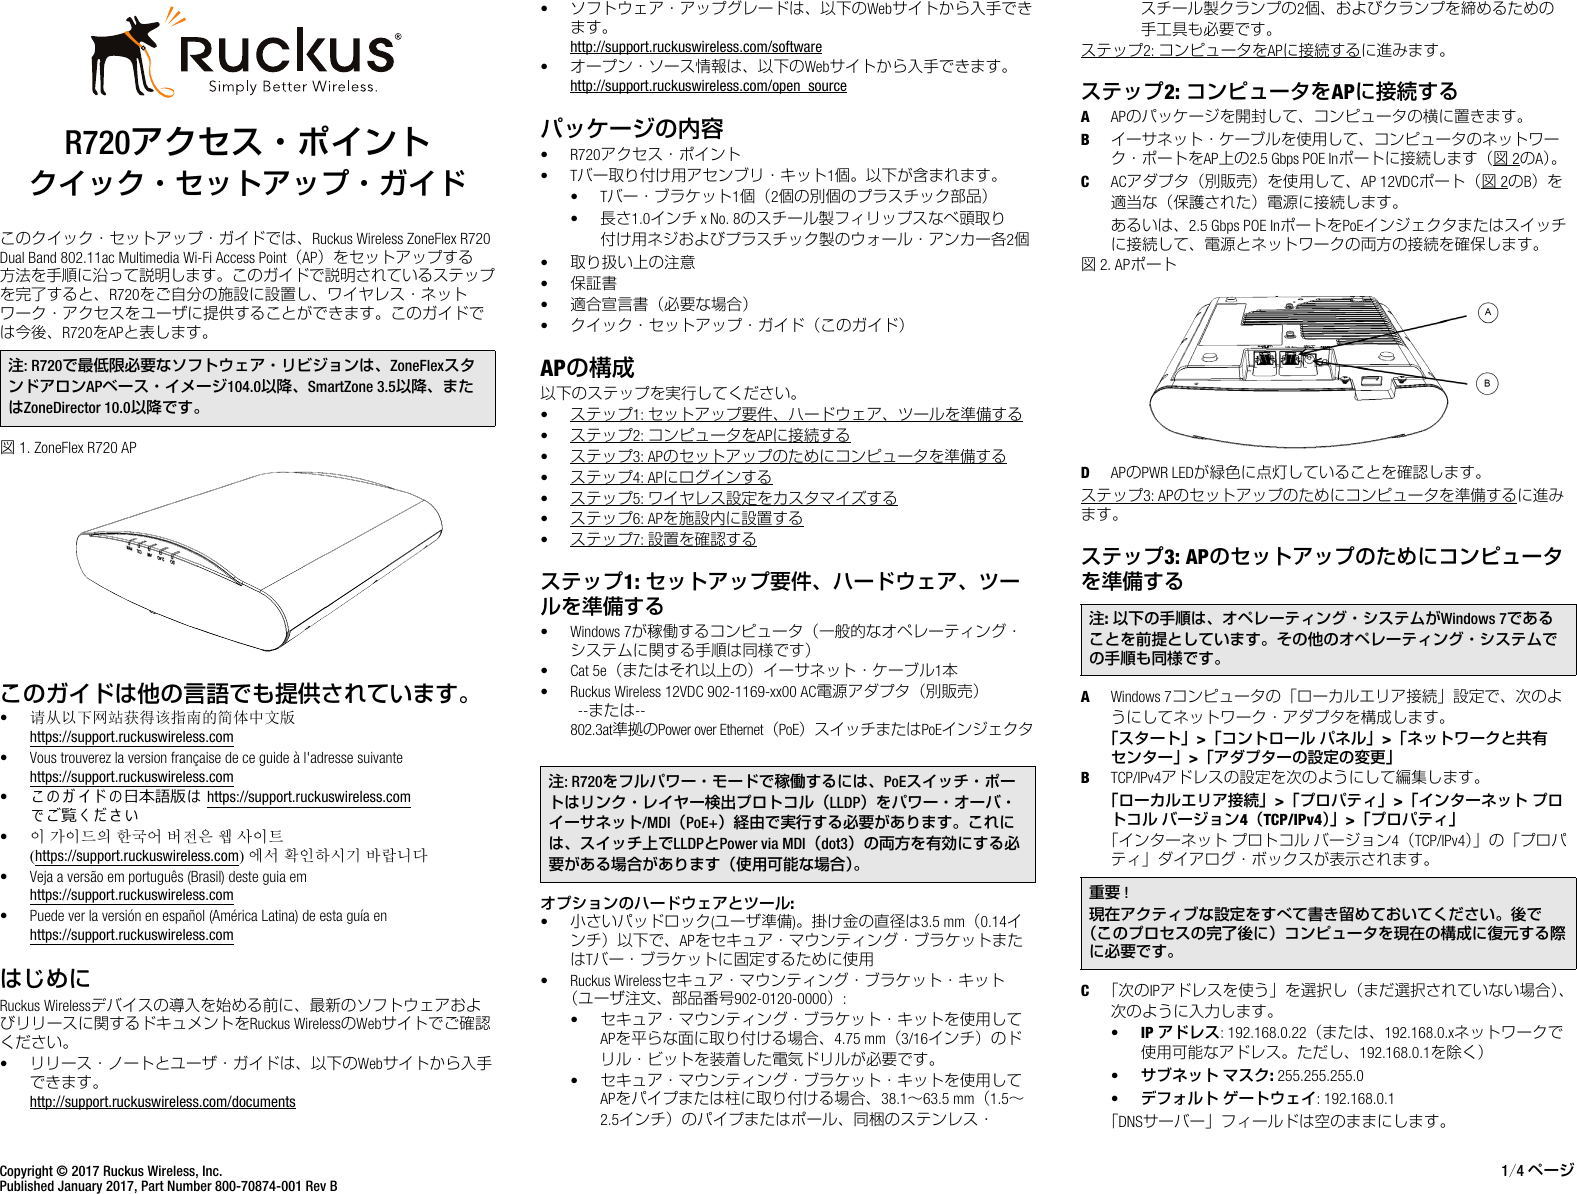 Page 1 of 4 - Ruckus R720 Access Point Quick Setup Guide Wireless Guide（Japanese Version, 日本語） R720-qsg-800-70874-001-rev B JA2